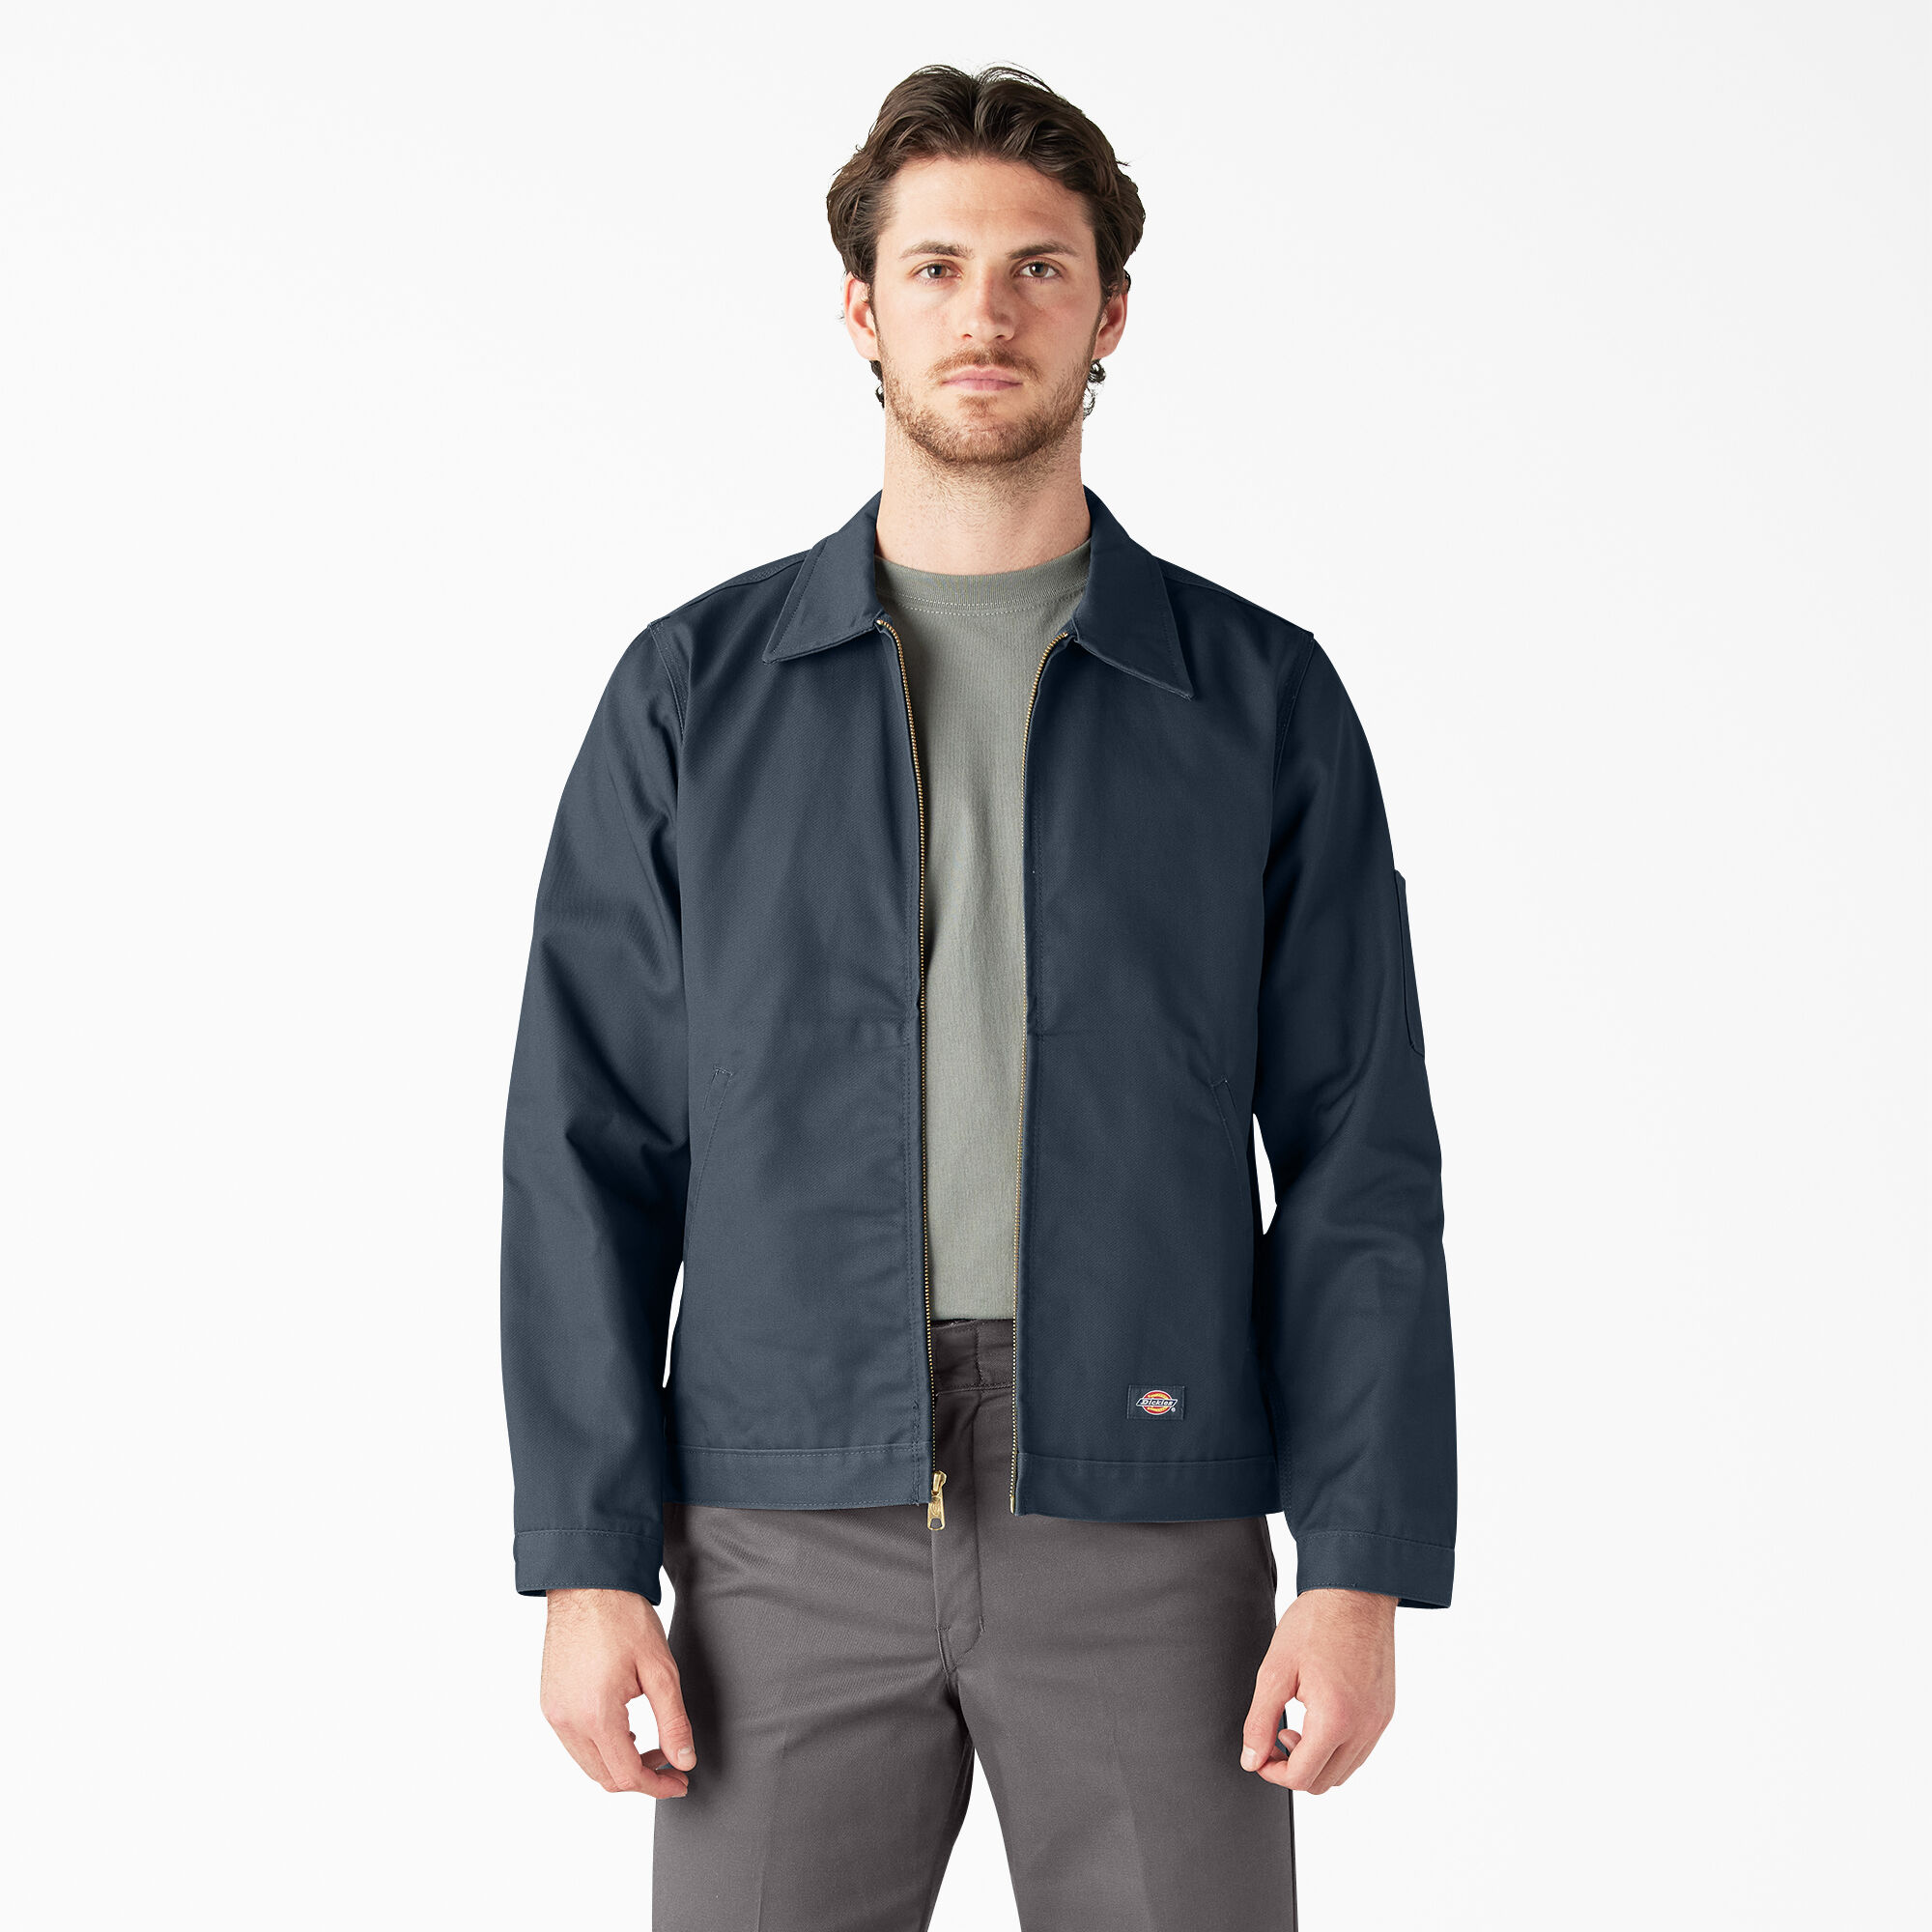 Men's Outerwear - Outerwear for Men | Dickies US